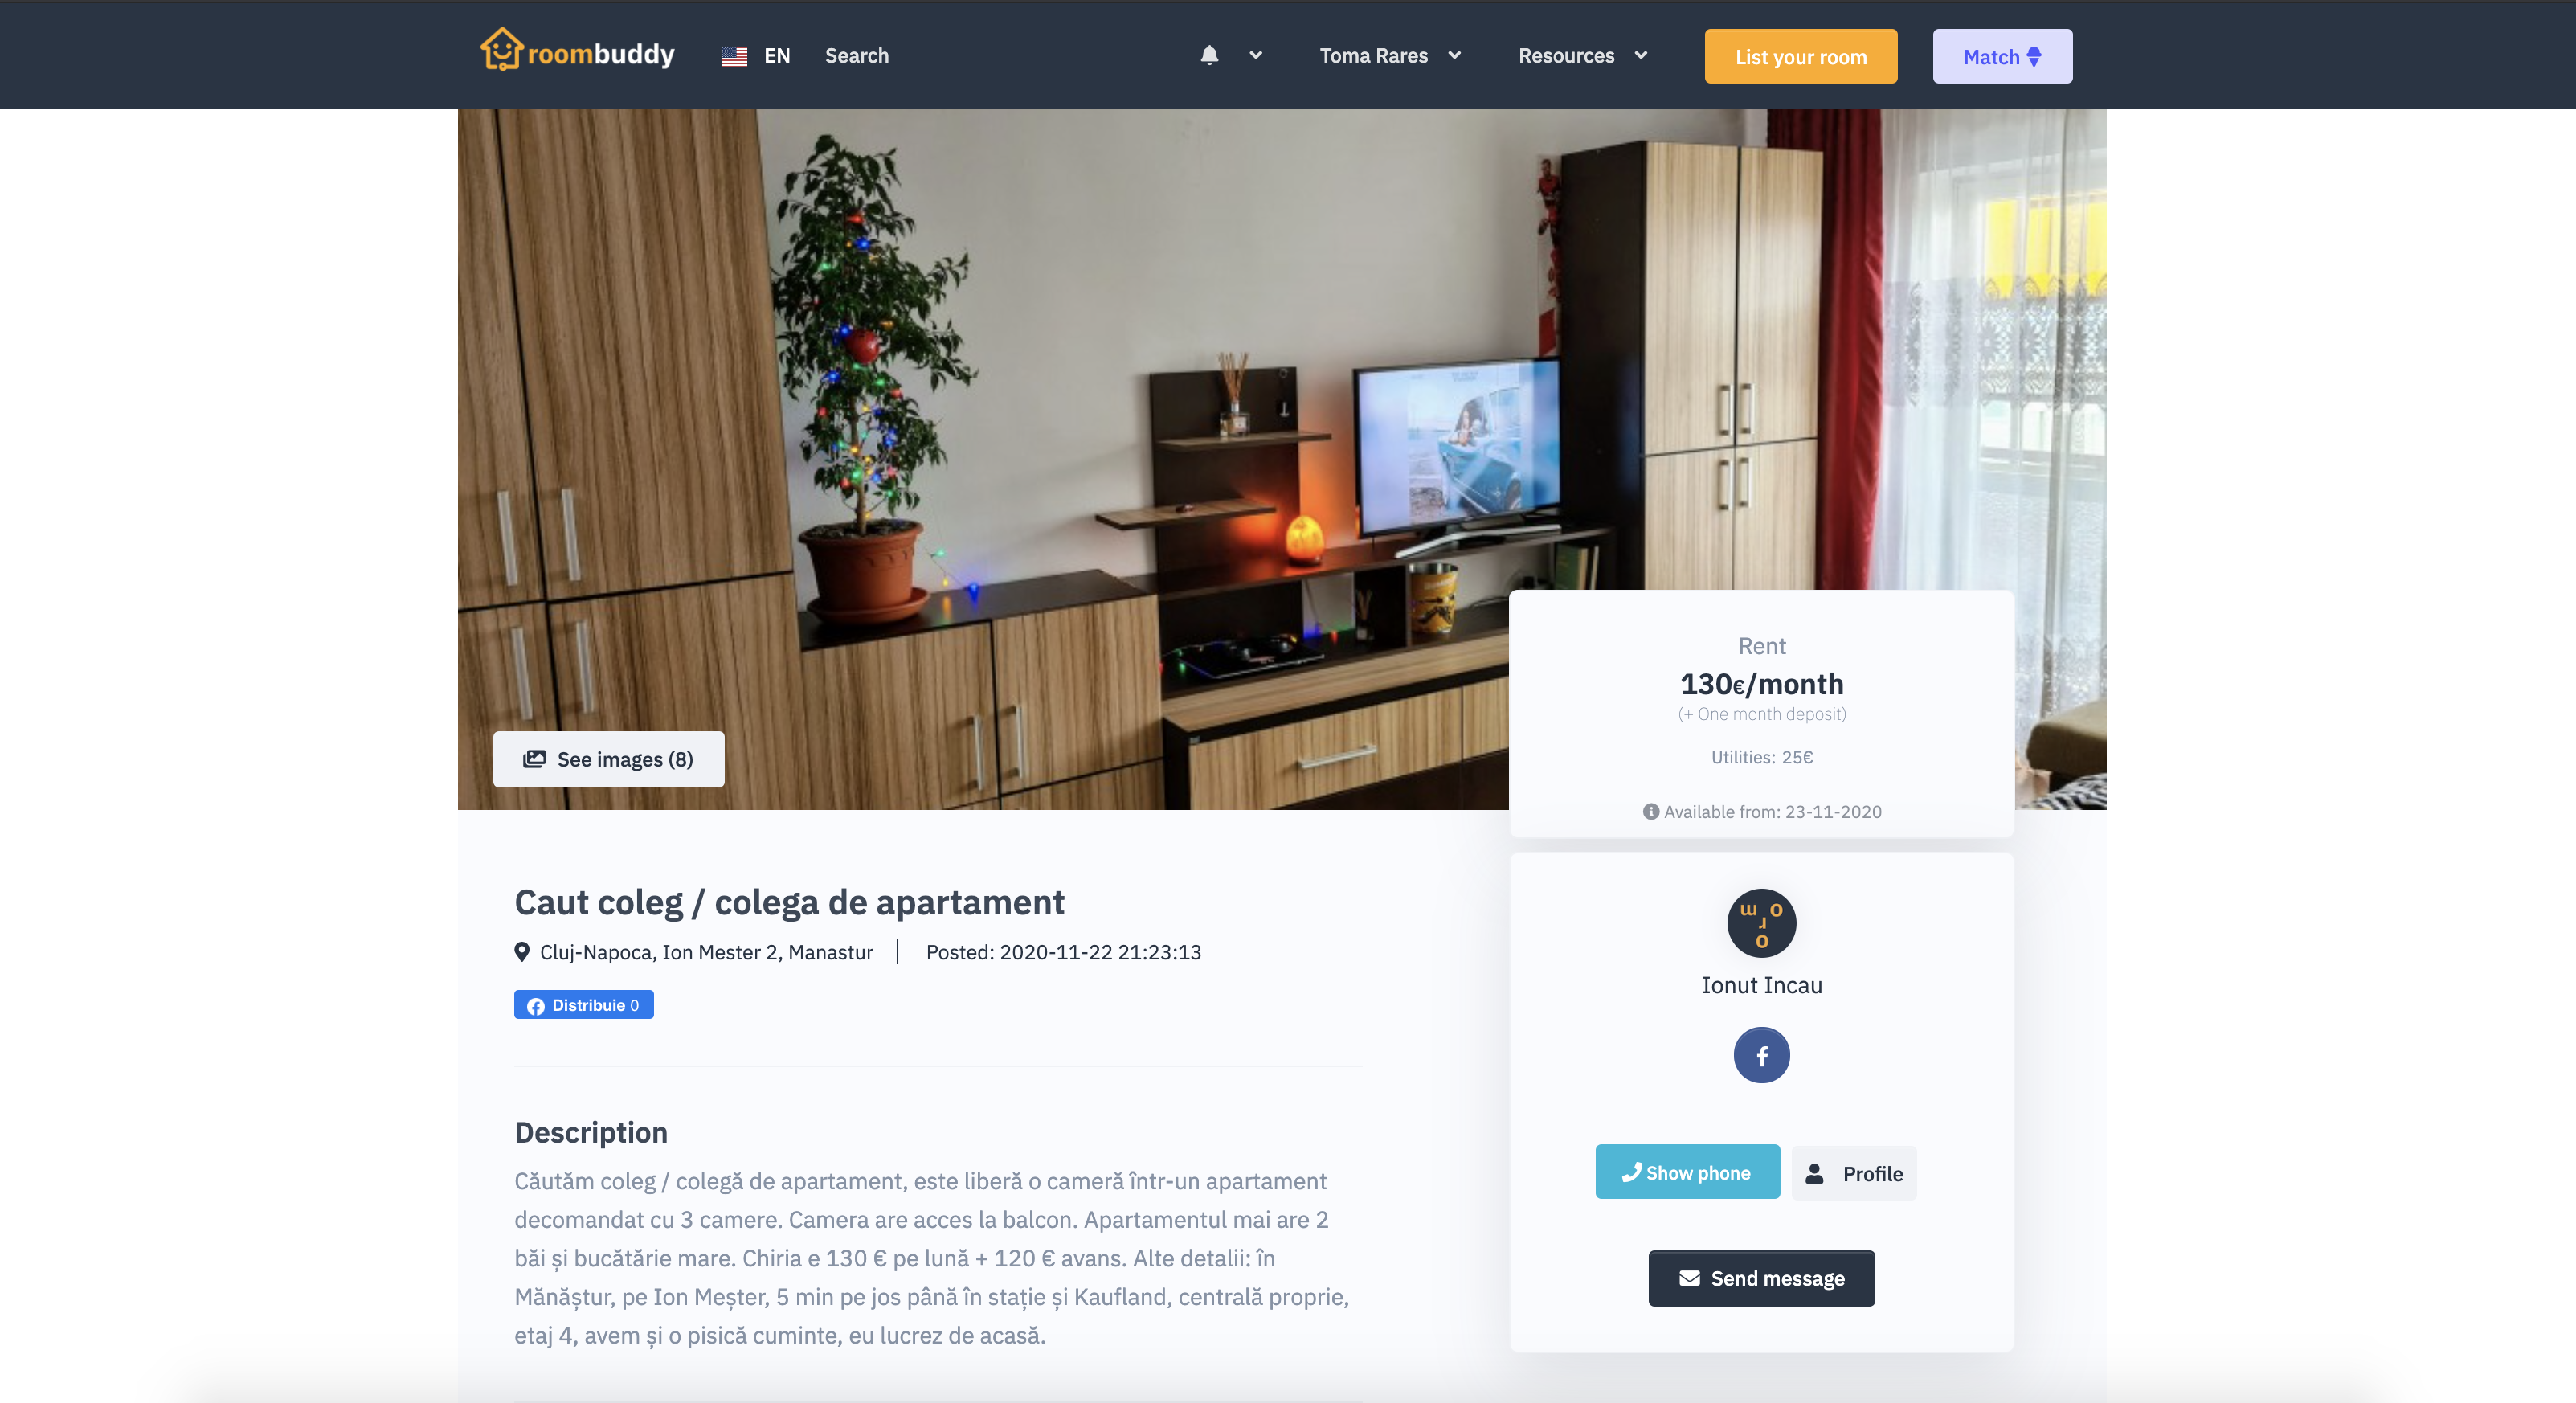 Know more about Roombuddy